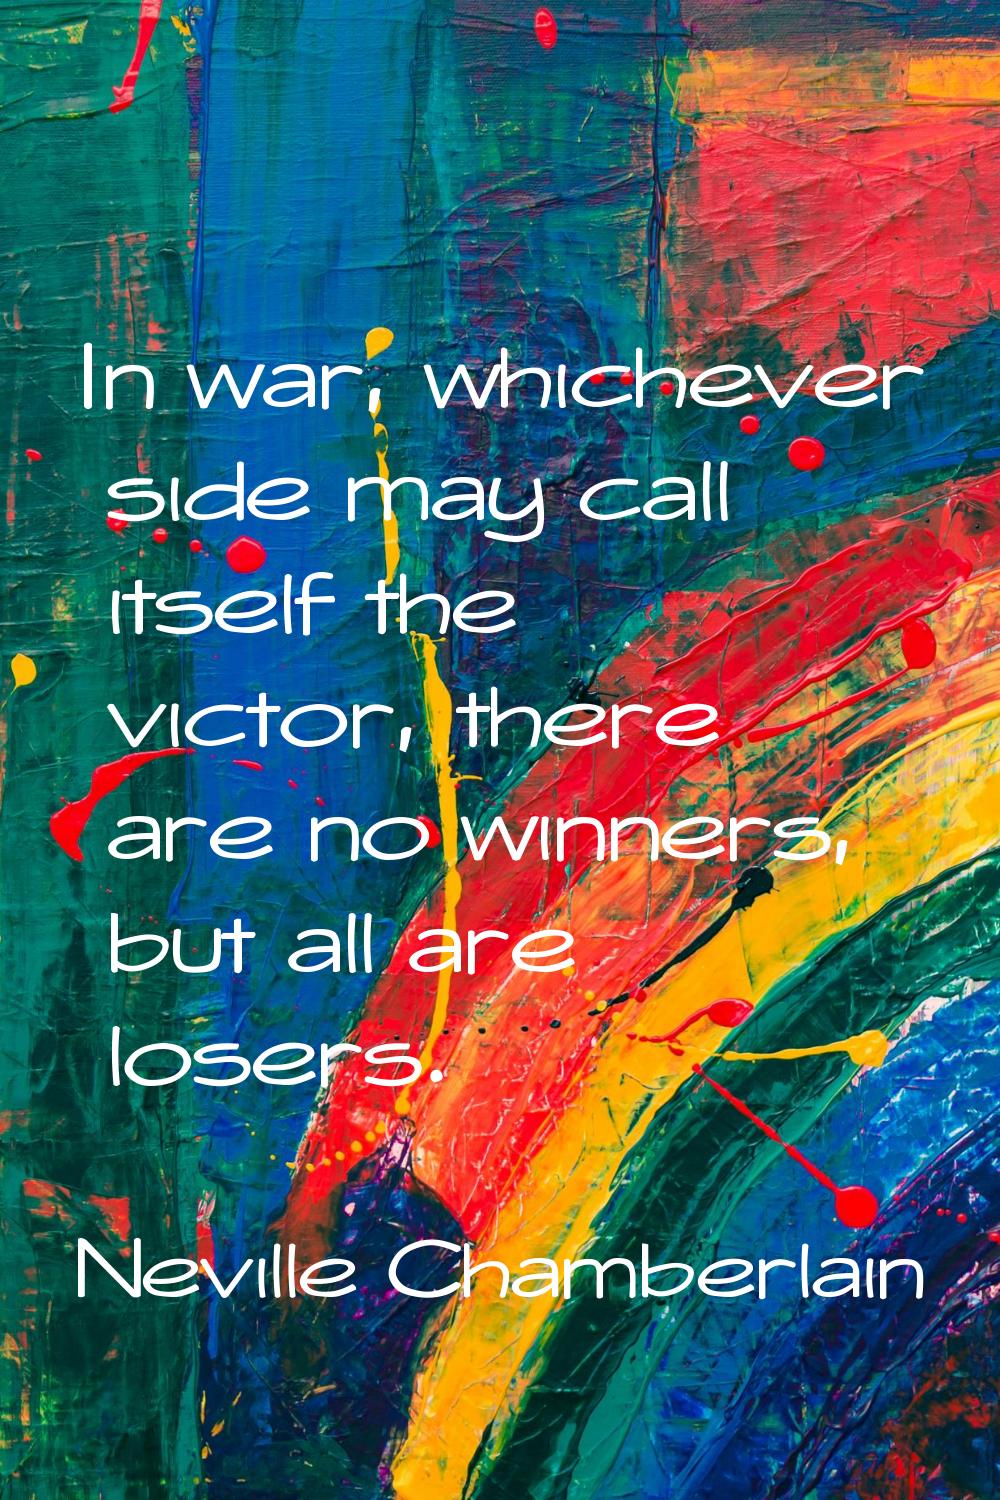 In war, whichever side may call itself the victor, there are no winners, but all are losers.